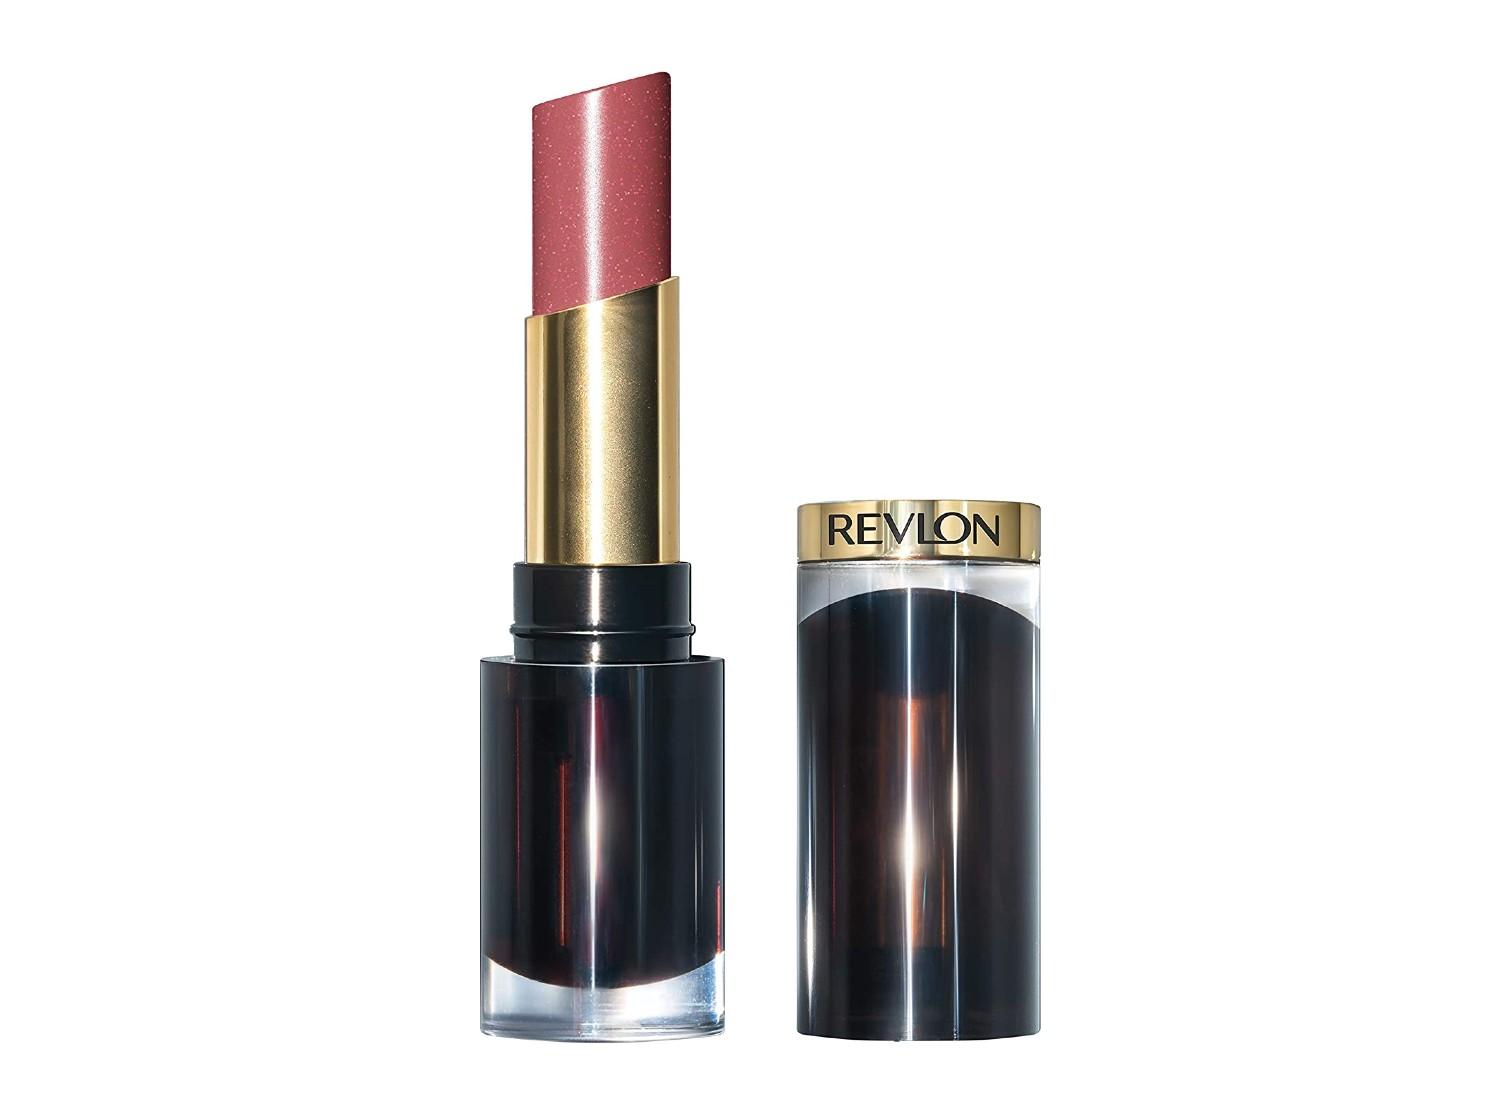 An open Revlon lipstick and its cap on a white background.